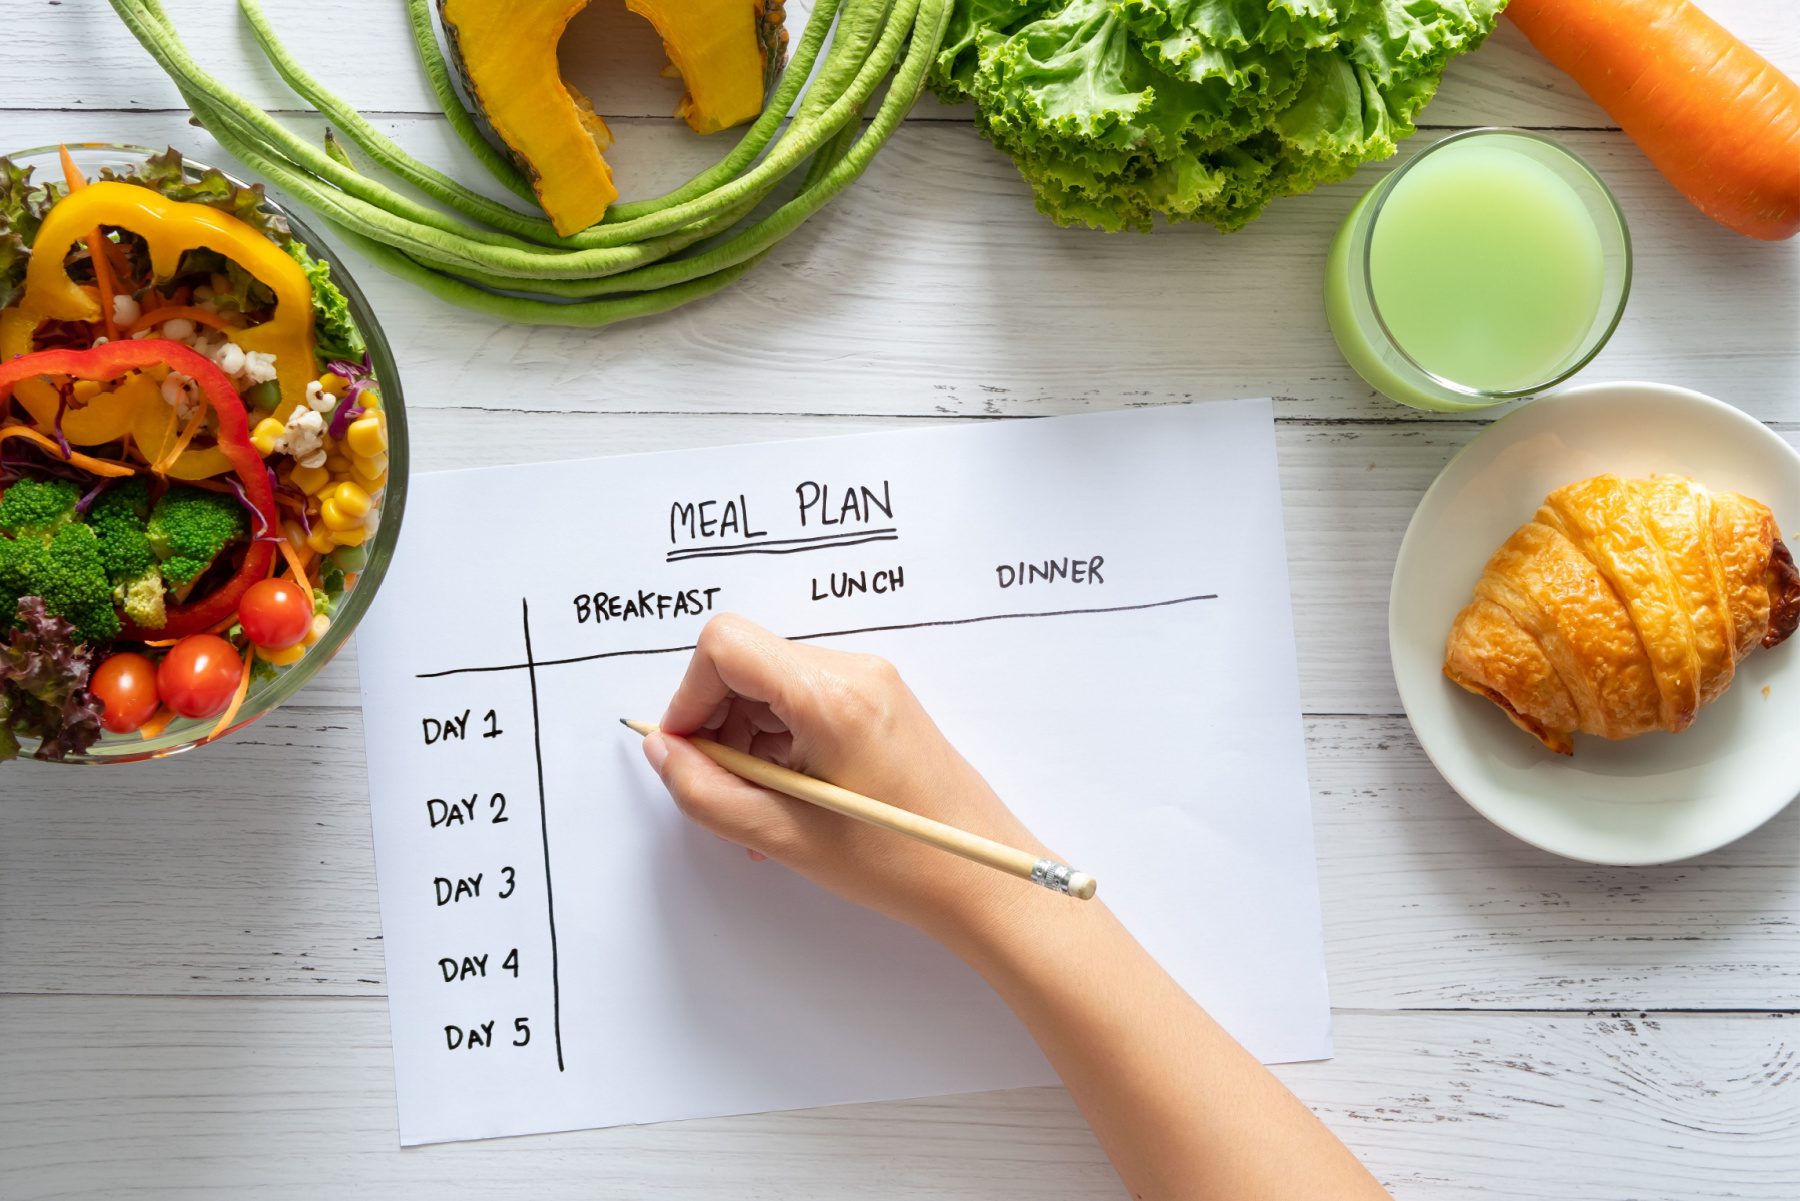 How Much Do Meal Plans Cost?